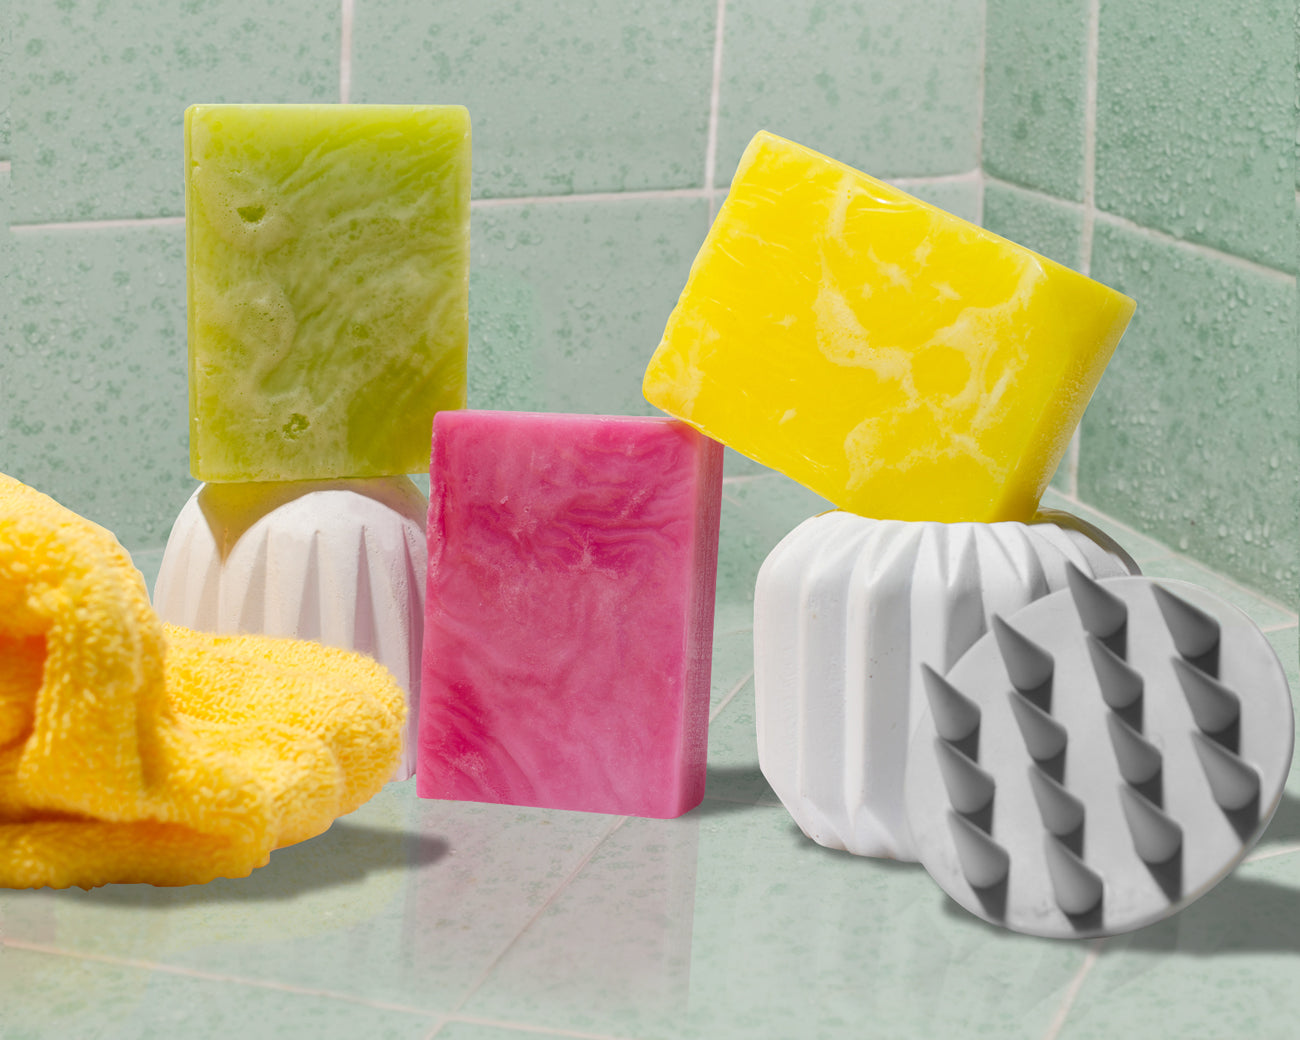 BODY WASHES & SPECIALTY SOAPS